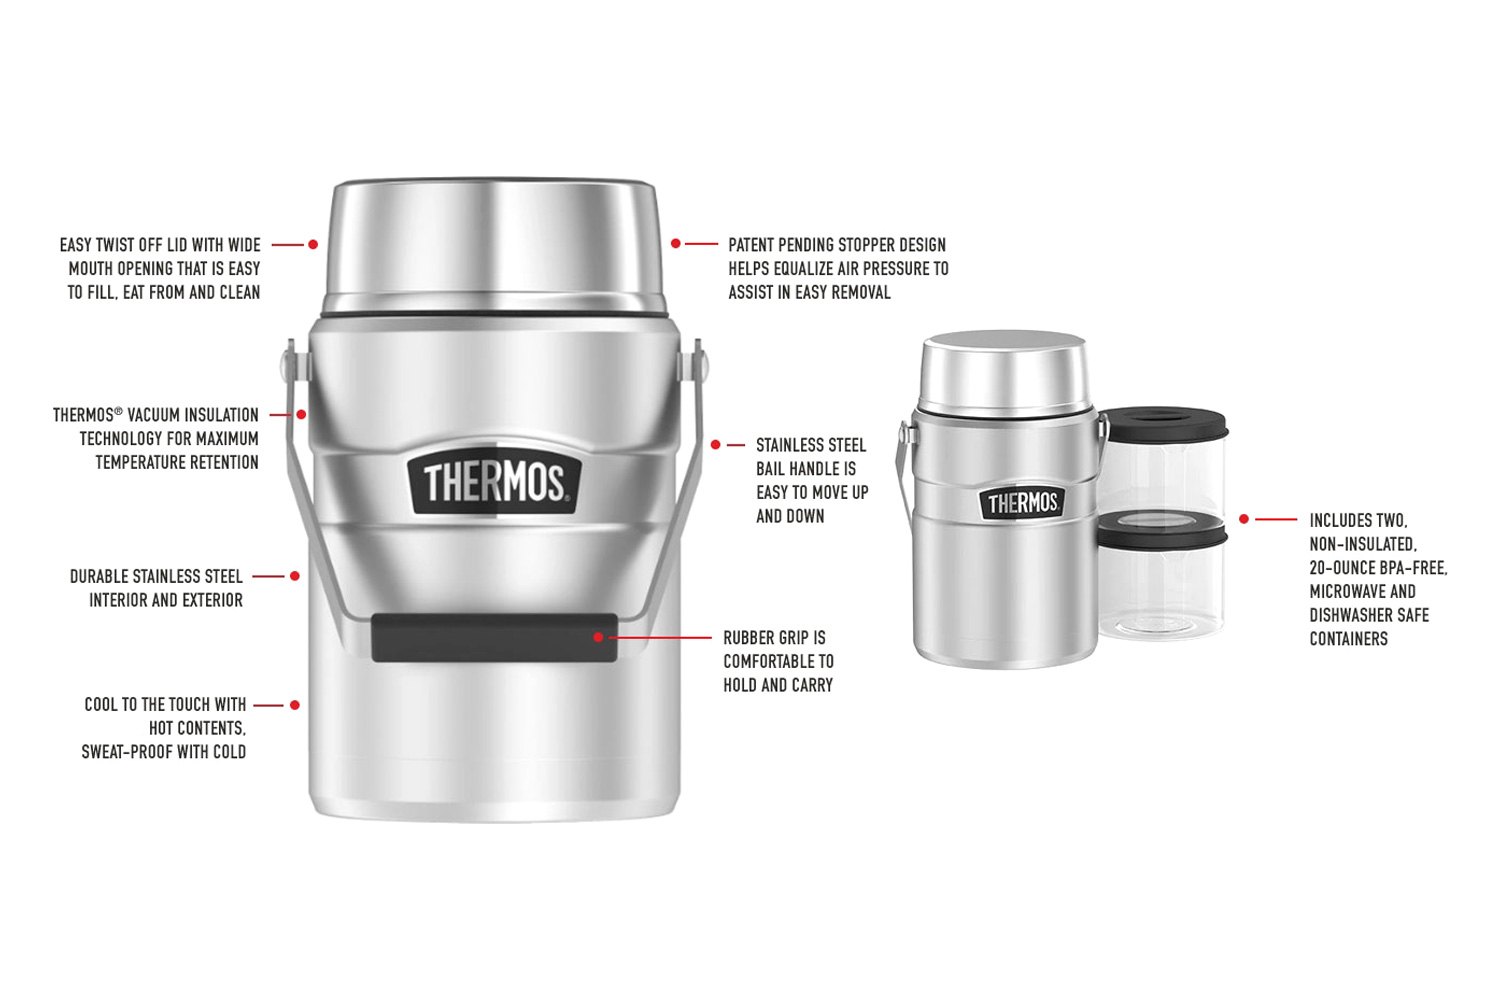 Thermos Stainless Steel Microwavable Food Jar with Stainless Steel